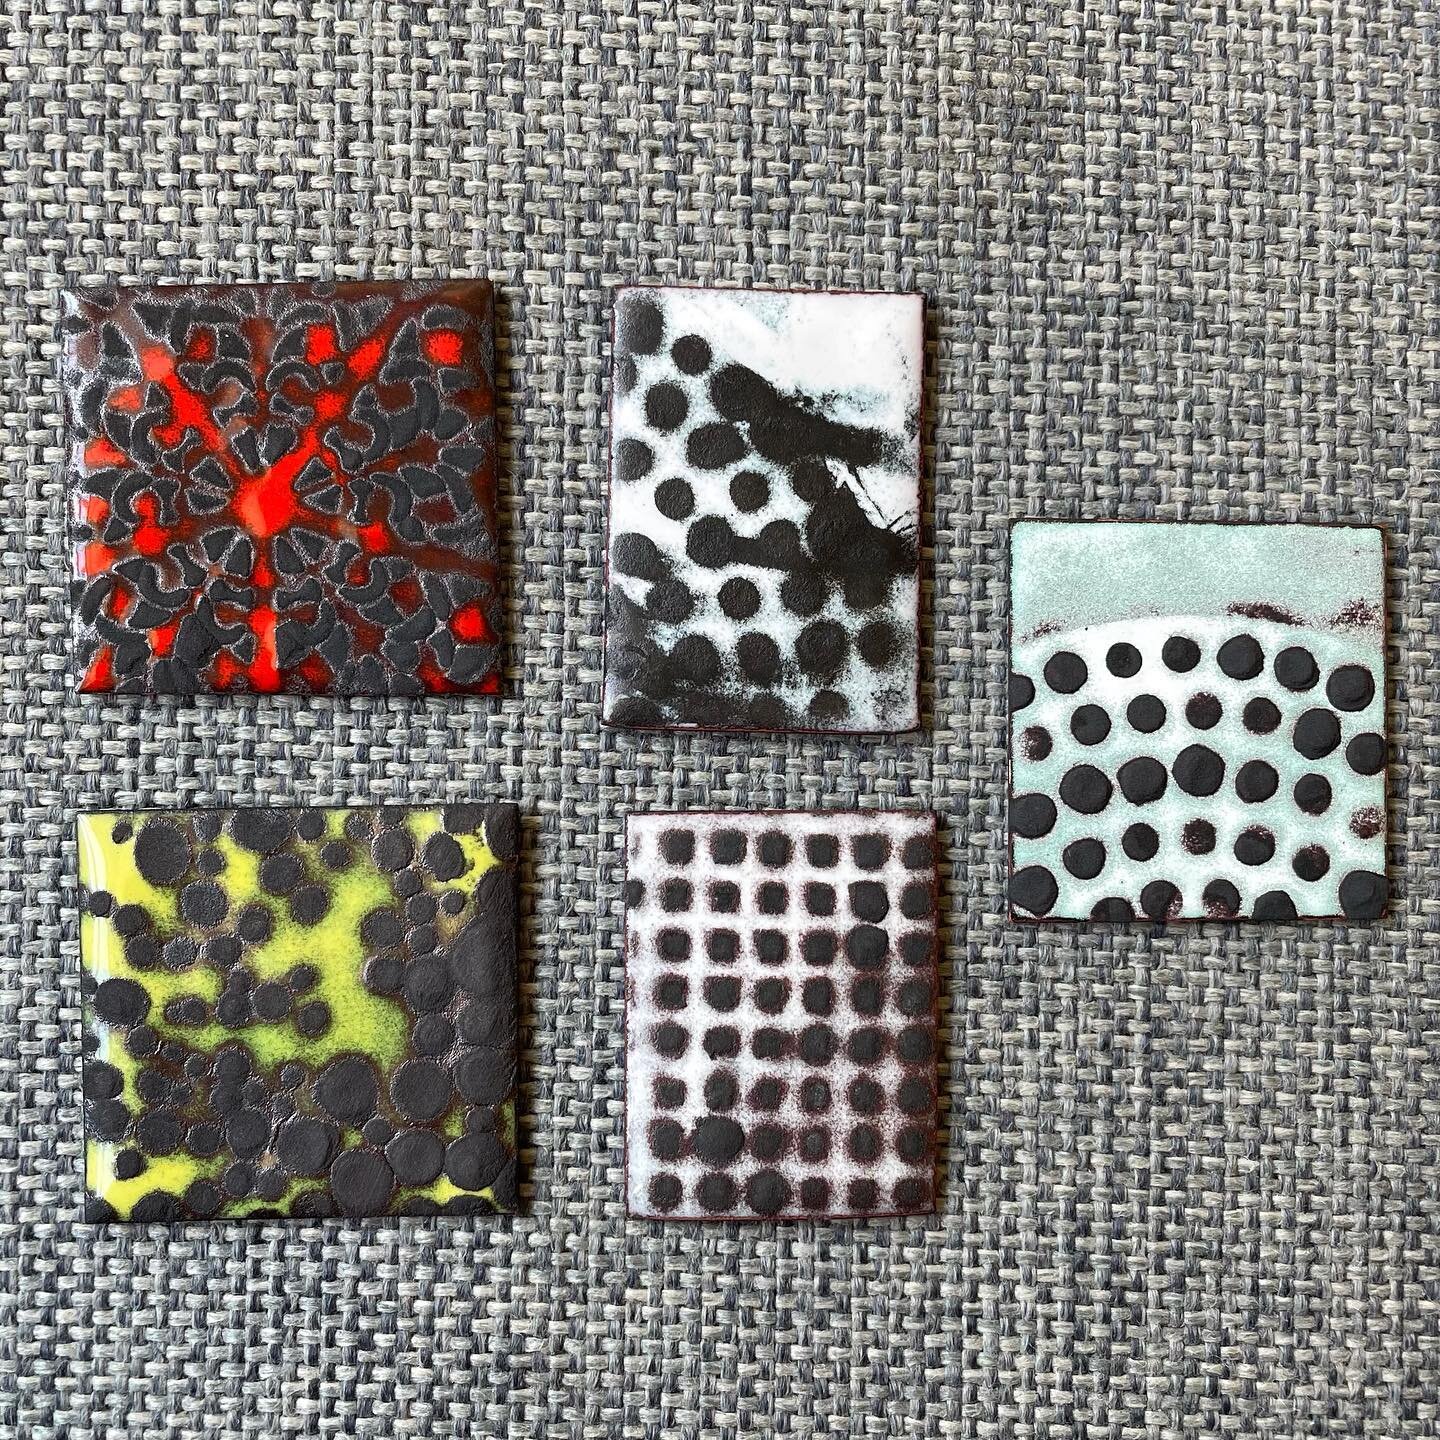 New samples of enamel with atomized copper from an online class with @annedinan. These were all created using stencils and the black is matte and a lightly textured. Looking forward to a new series of work featuring this technique! 
&mdash;
#enamelis